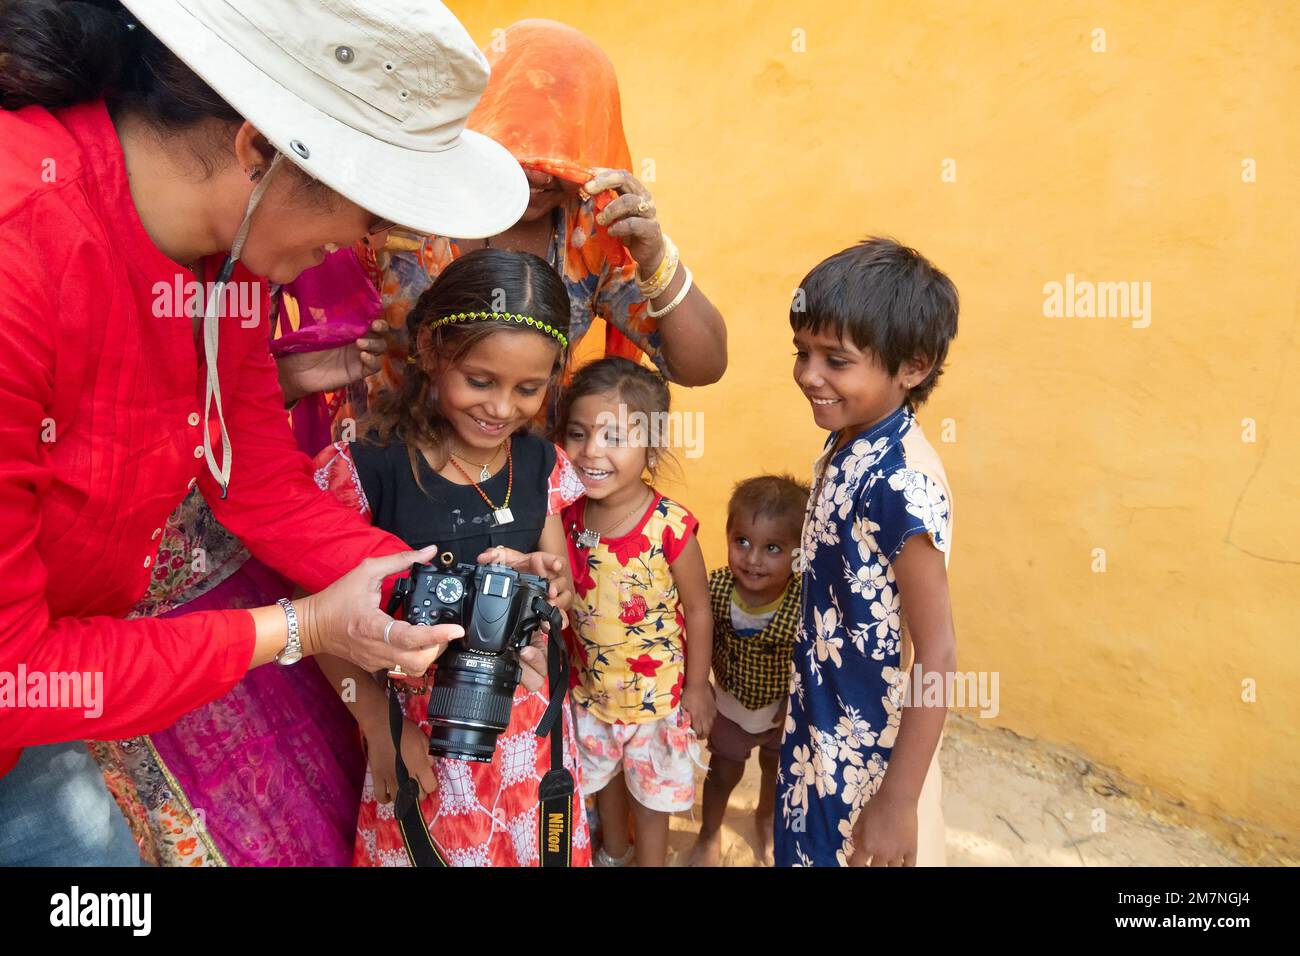 Jaisalmer, Rajasthan, India - 15th October 2019 : Female traveller and woman photographer showing pictures of smiling and happy Rajasthani children. Stock Photo